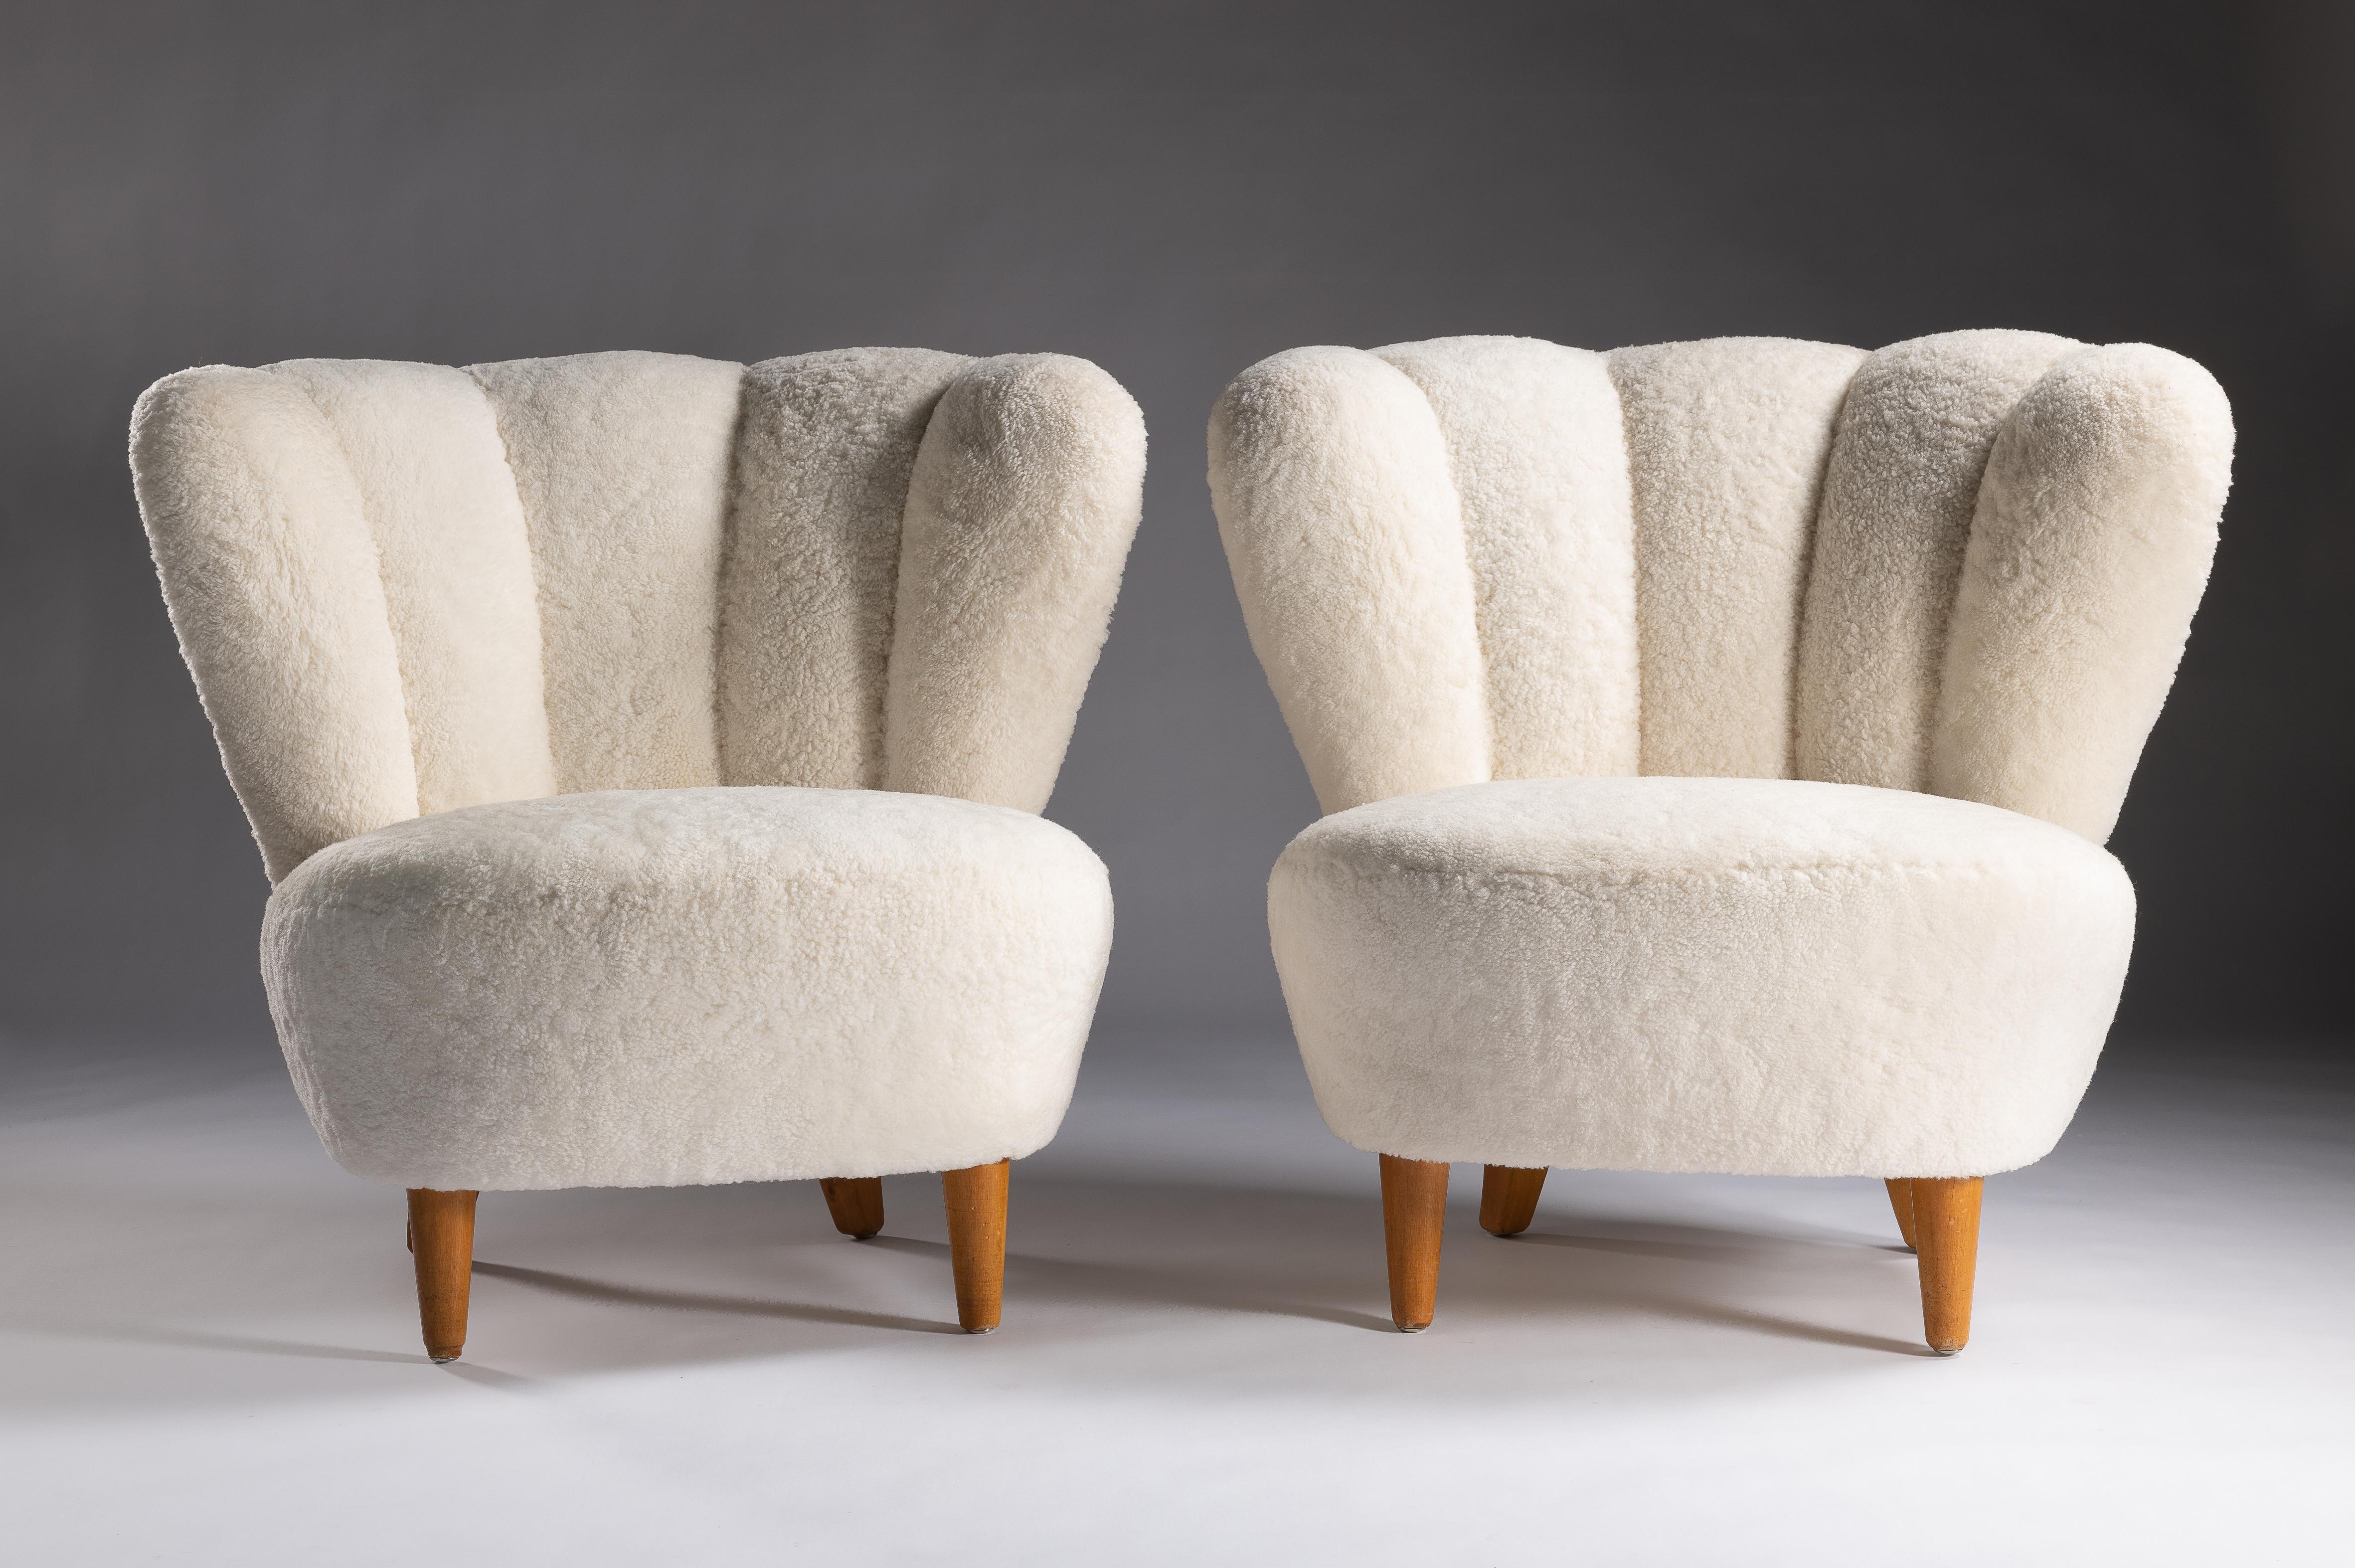 A pair of Scandinavian Vintage armchairs.
Made in the 1950s, the design was produced in Central European furniture factories throughout the mid-20th Century. 
The eye-catching silhouette and comfortable shape has had an enduring appeal. Influenced